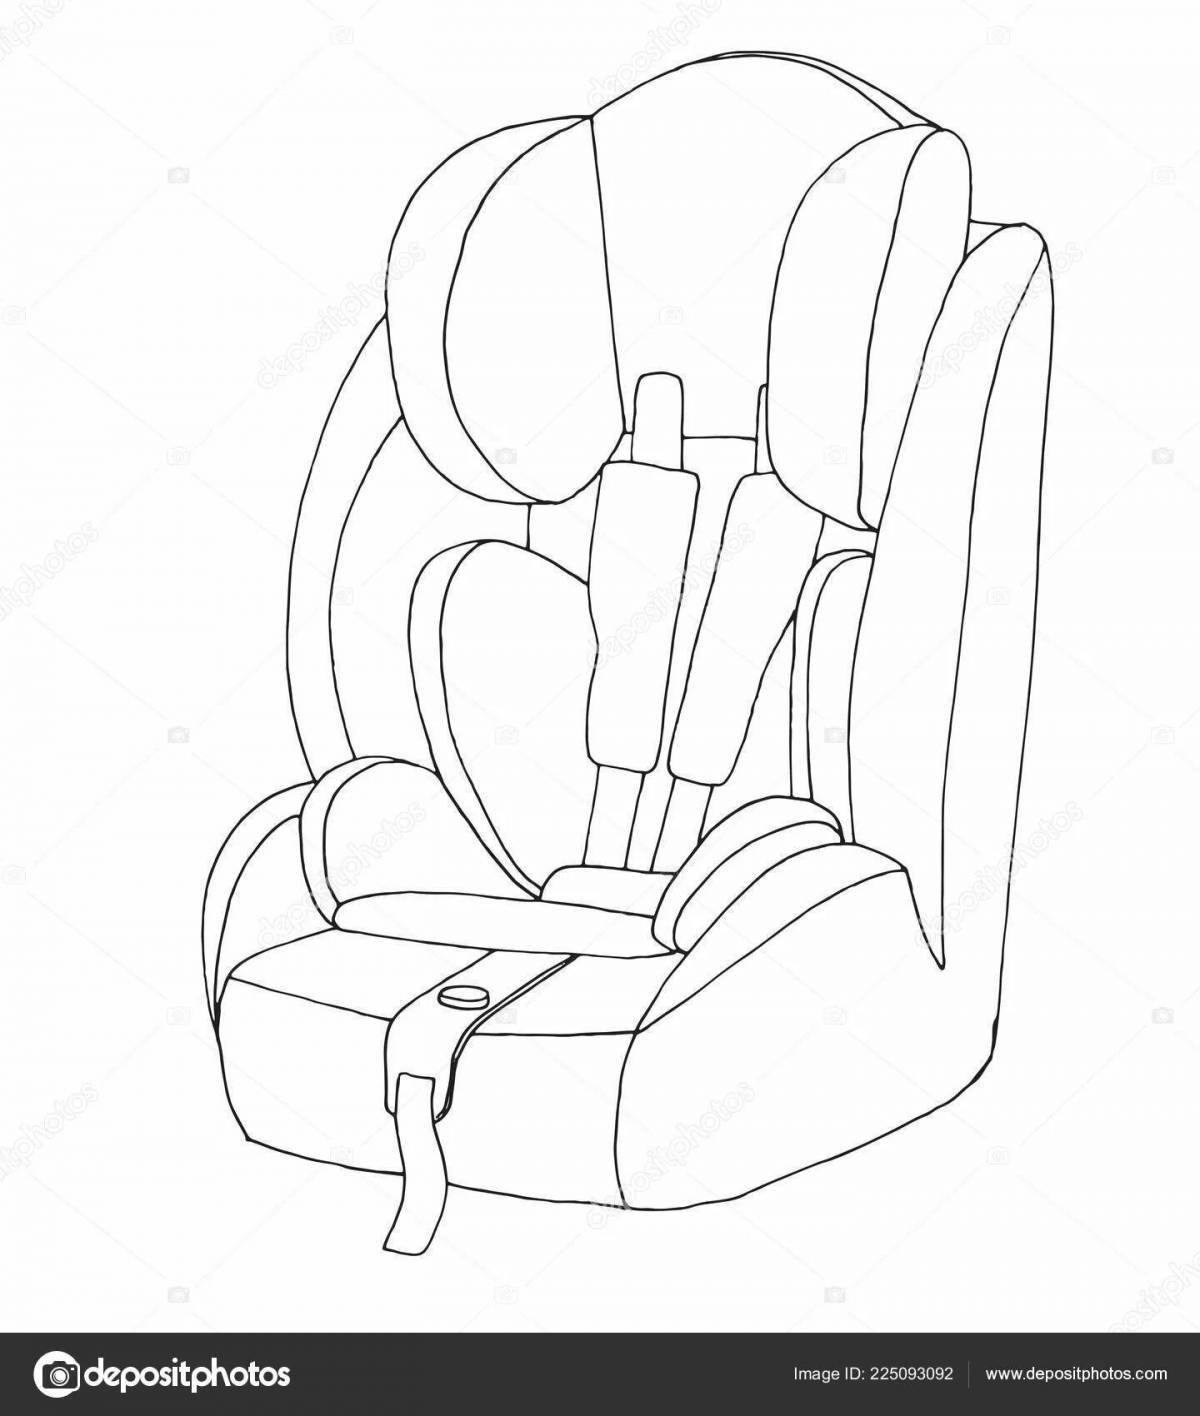 Animated car seat coloring page